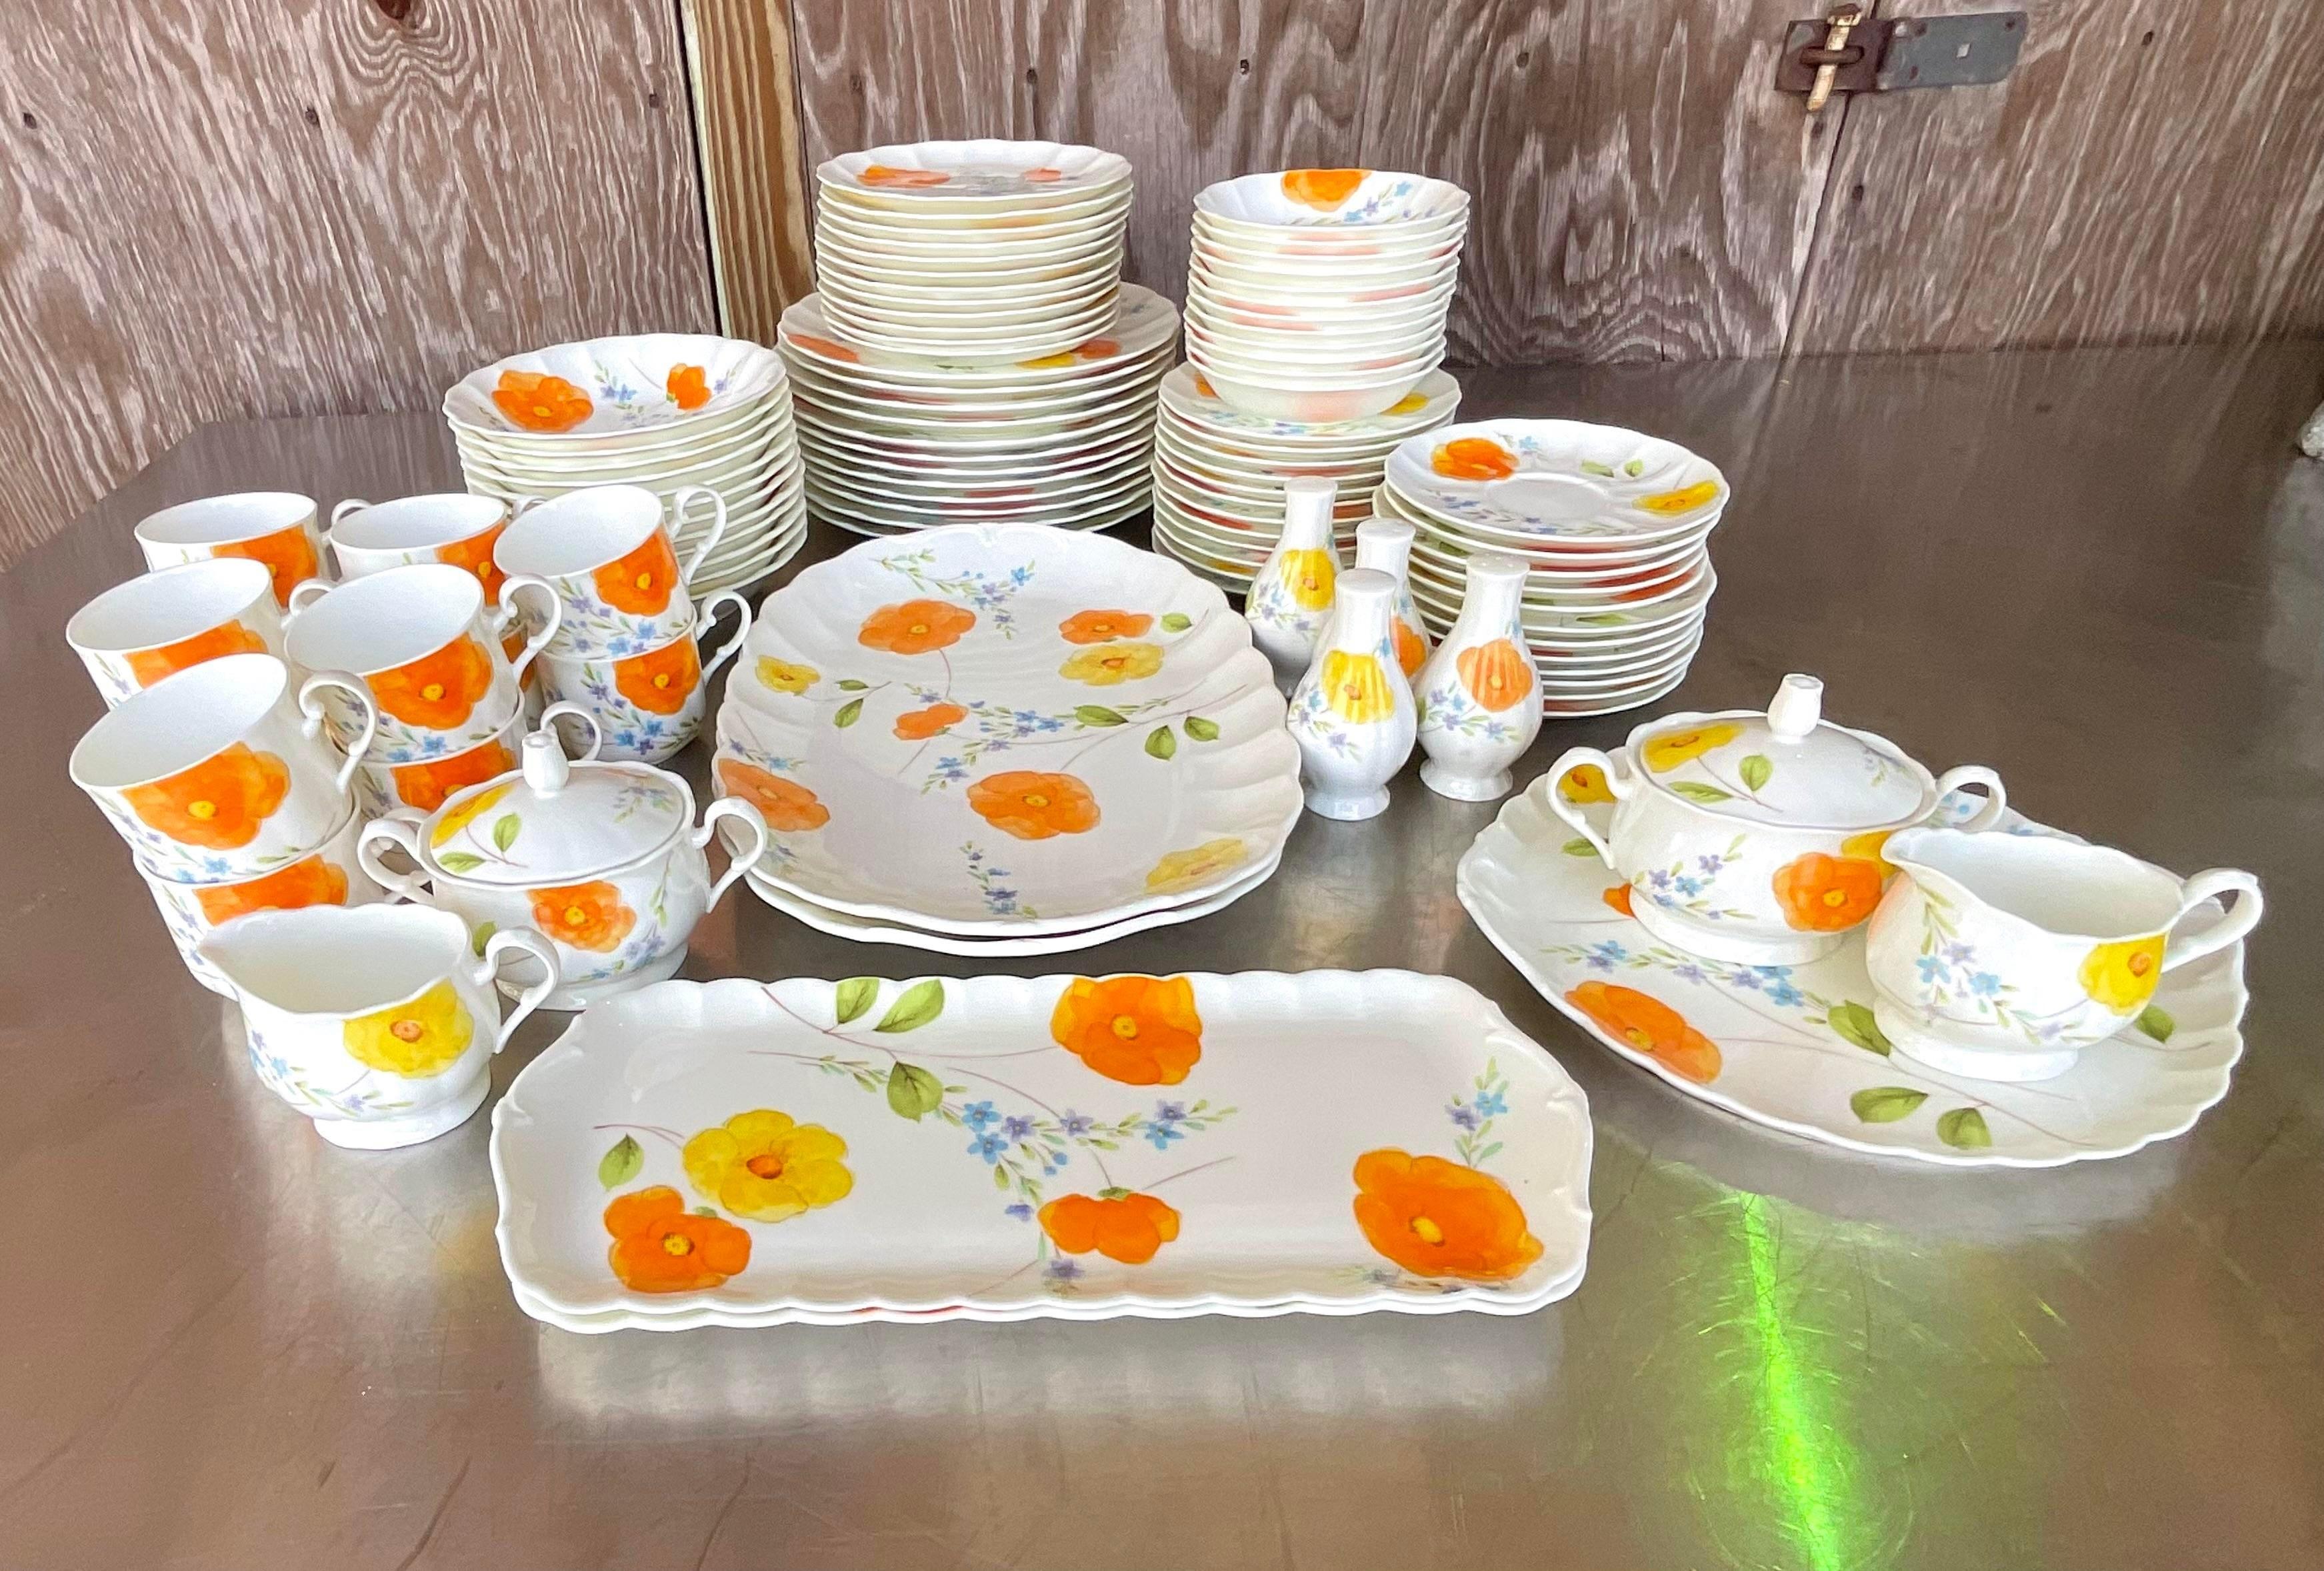 A spectacular set of vintage Mikasa Bone china. A pristine service for 12 in its original wrapping. The coveted “Poppy Love” pattern with its beautiful and colorful floating flowers on an off white background. No chips. Signed on the bottom.